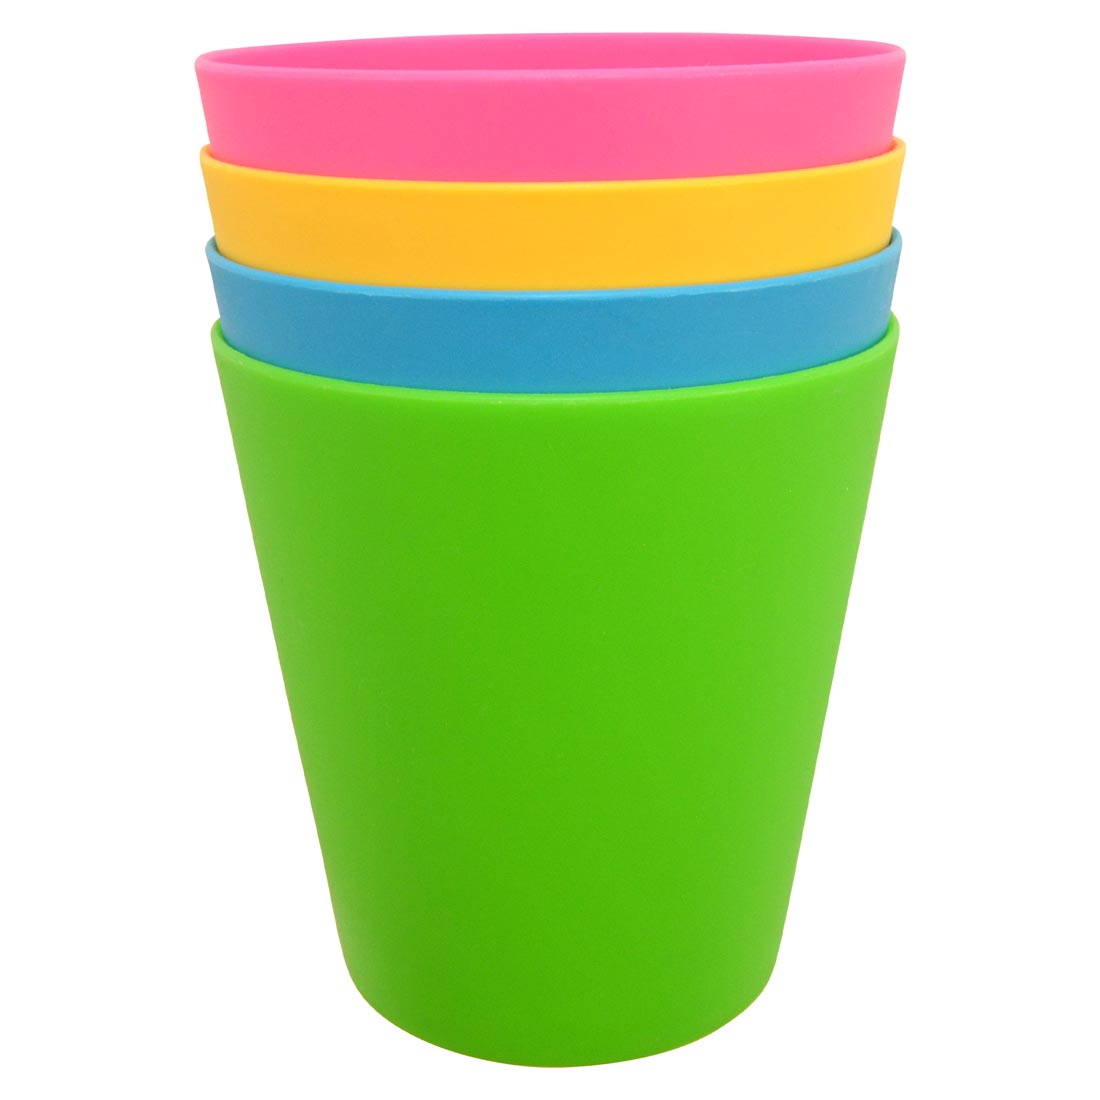 4 colored cups for holding kids scissors